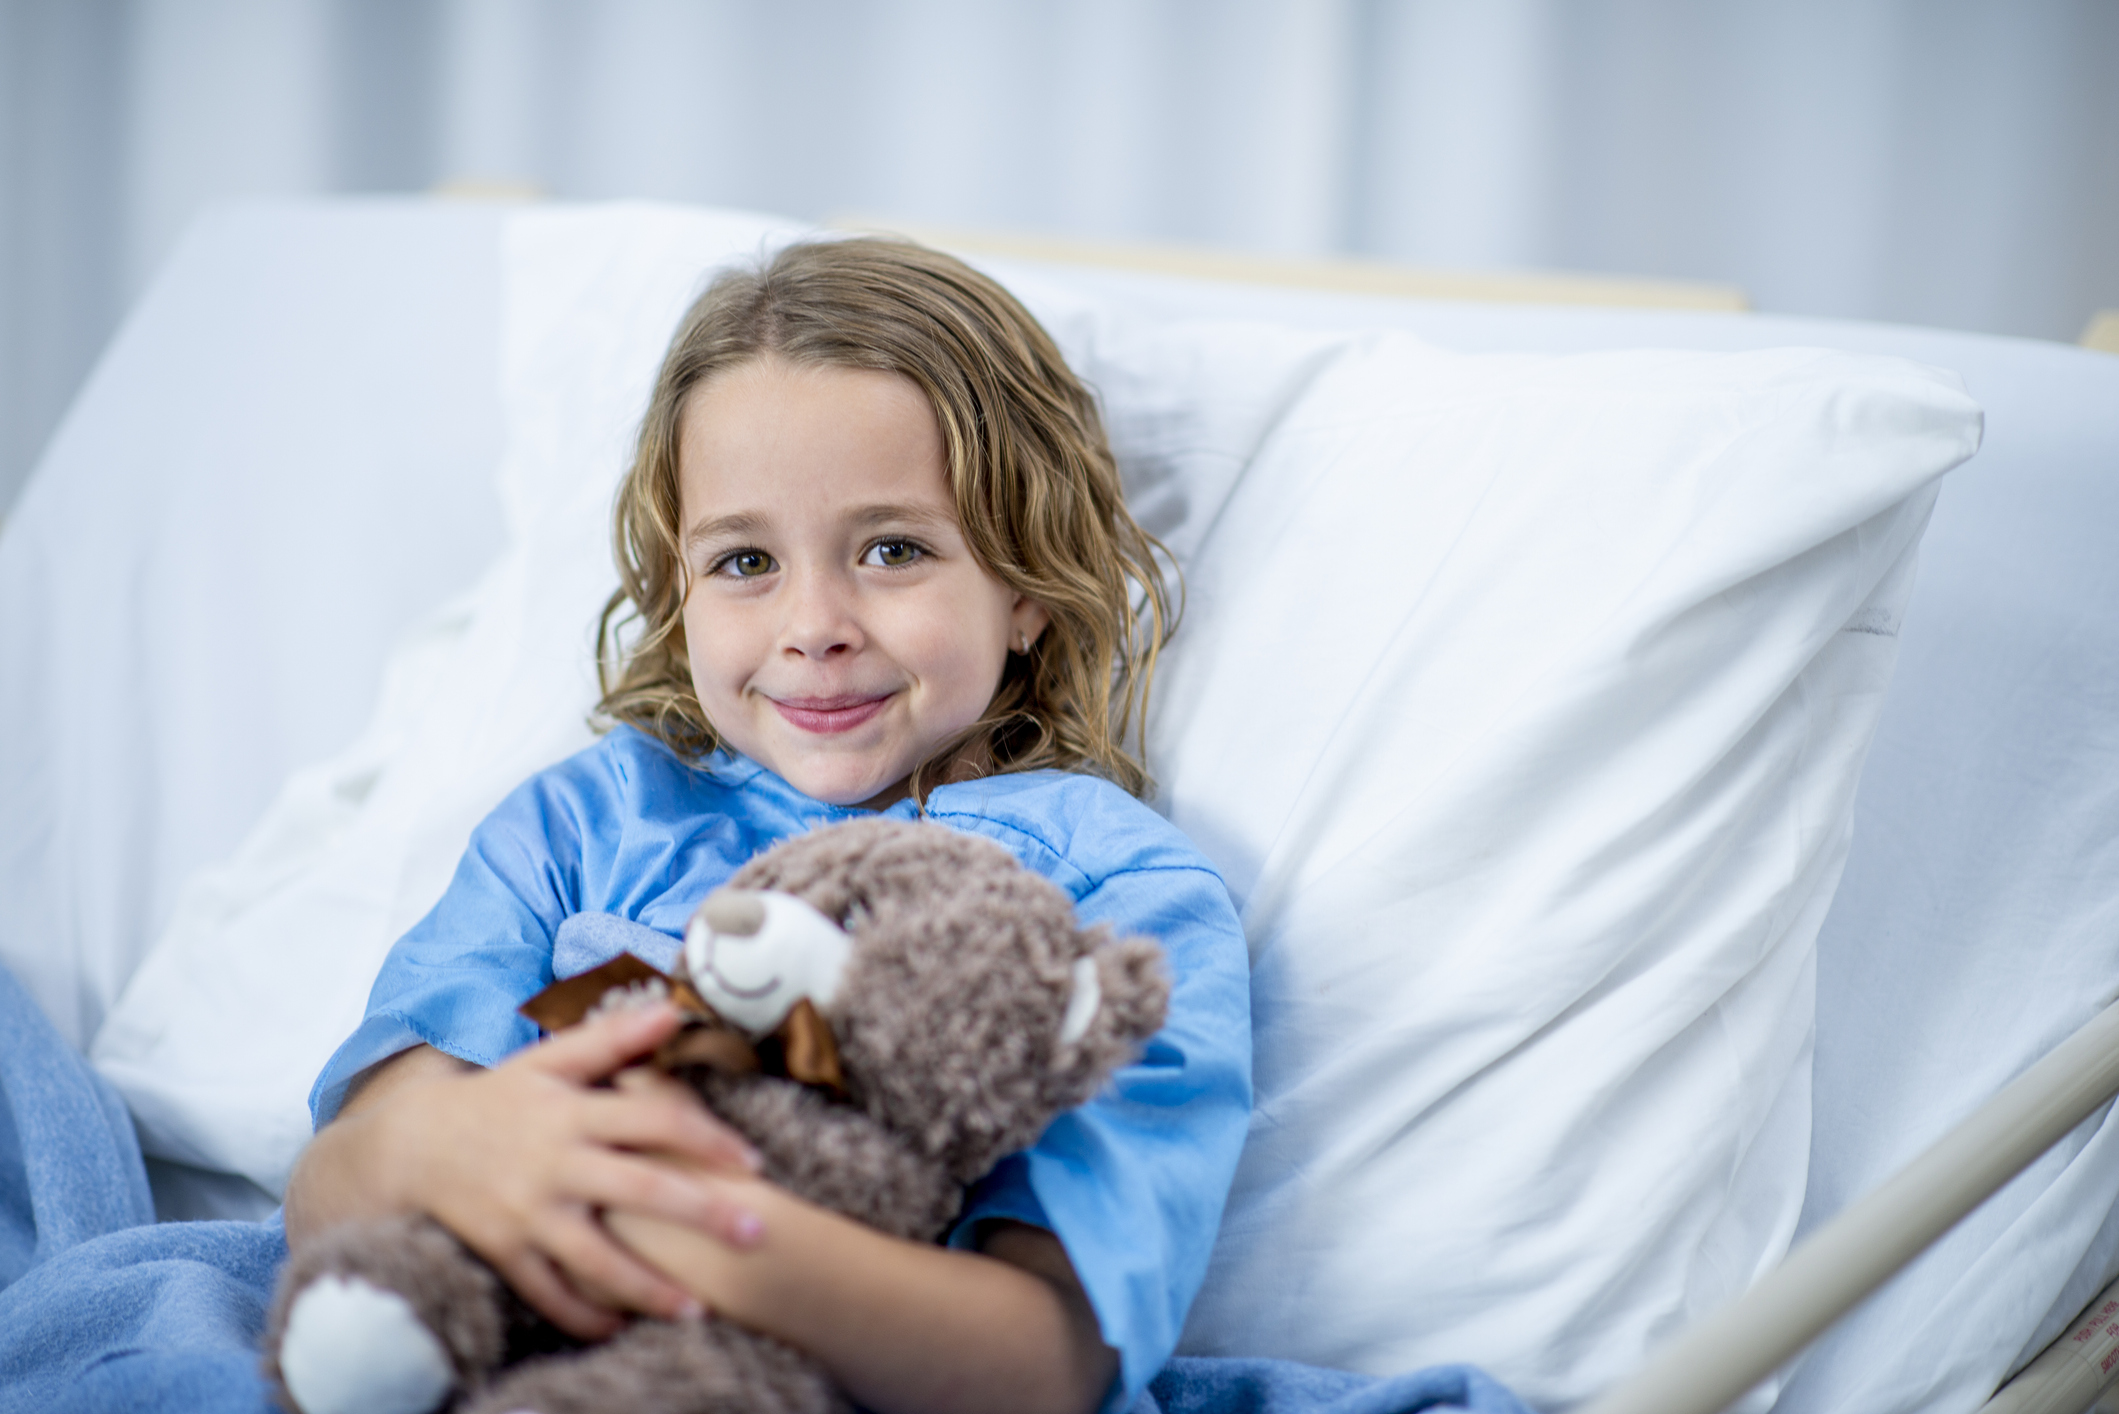 A Caucasian girl is indoors in a hospital room. She is smiling at the camera while holding a teddy bear.